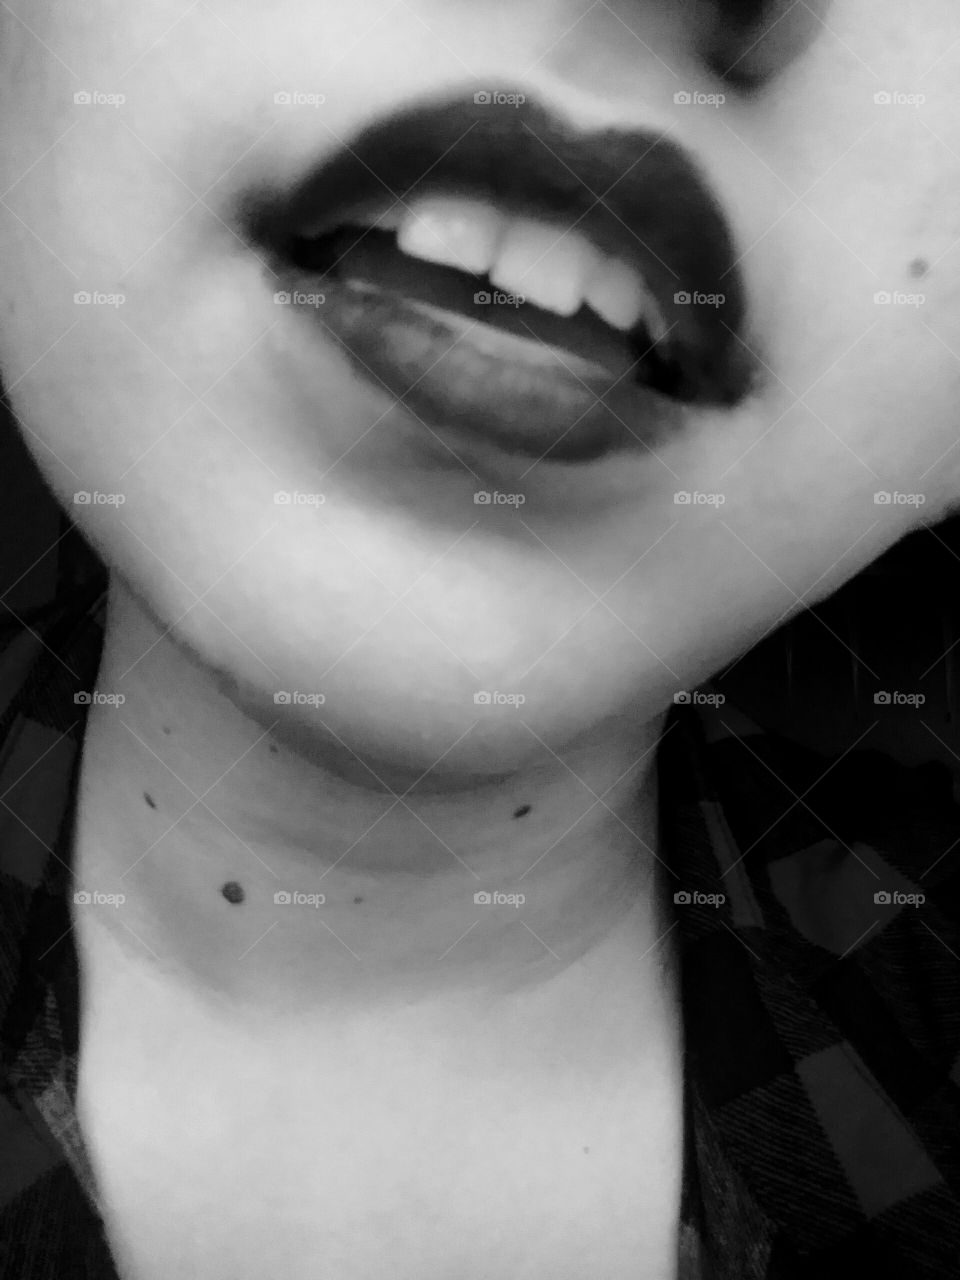 lips Black and white